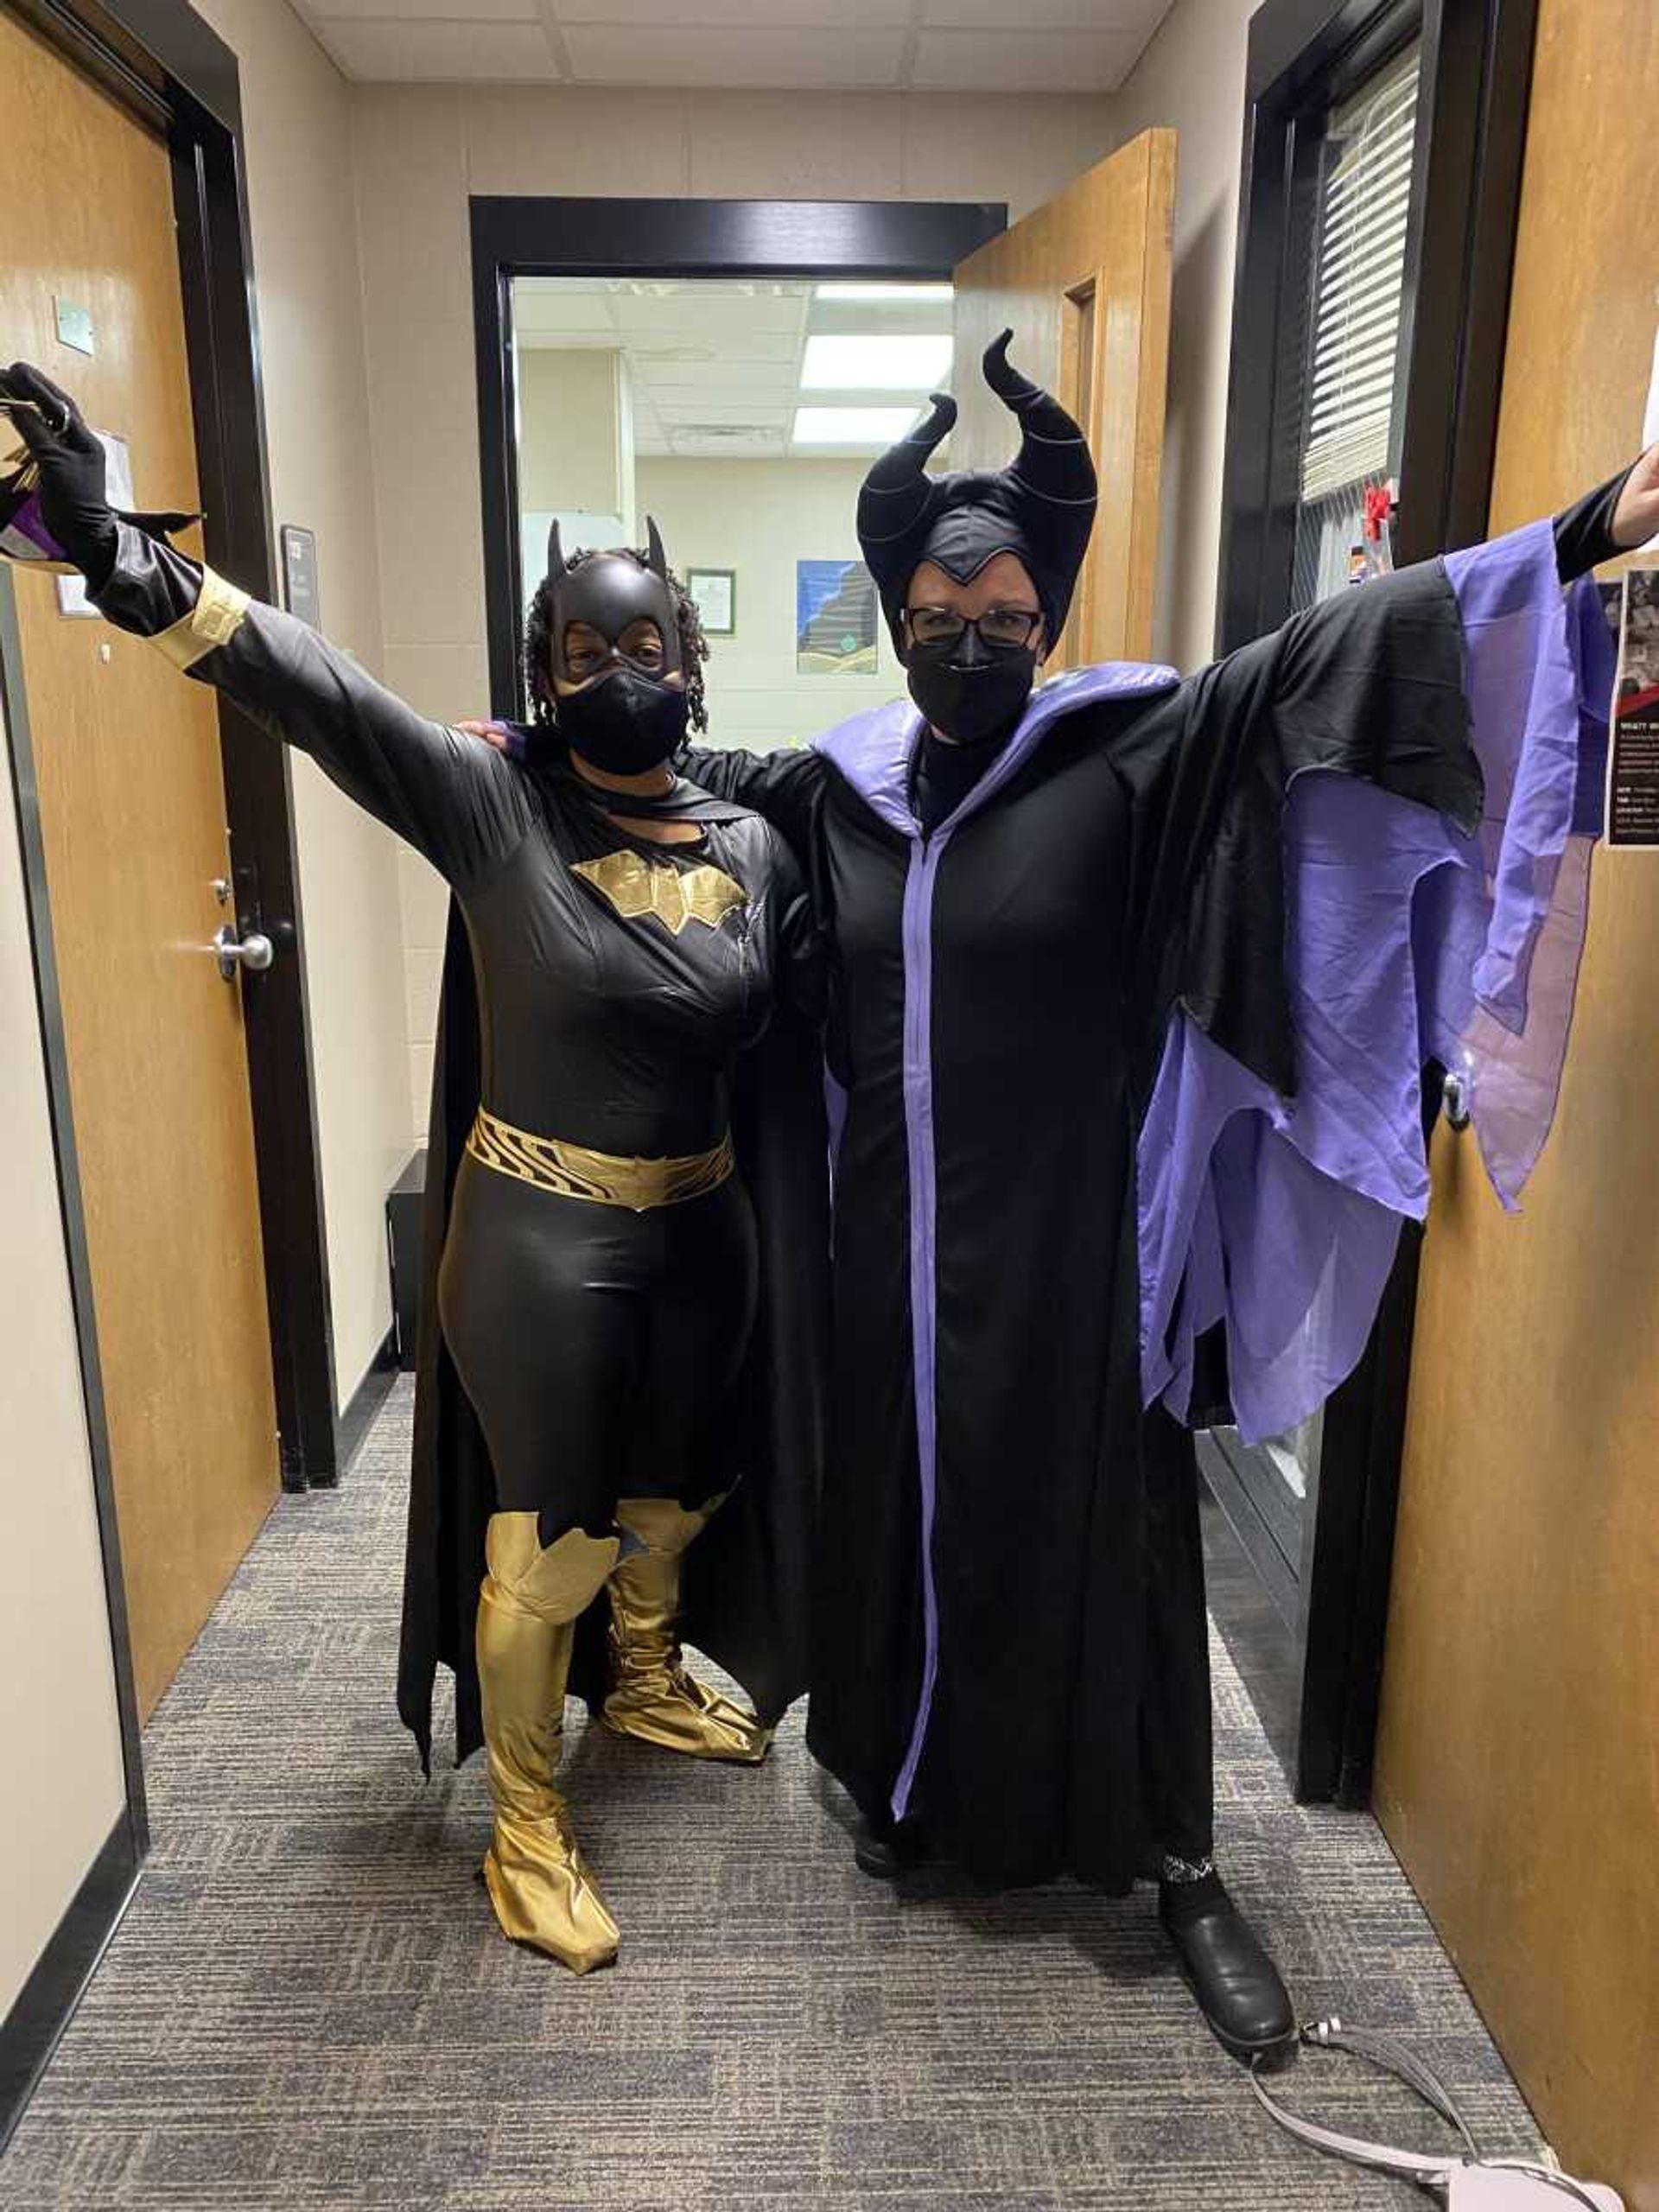 Dr. Shonta Smith (left) and Dr. Brandy Hepler (right) Dressed Up as Batman and Maleficent. 